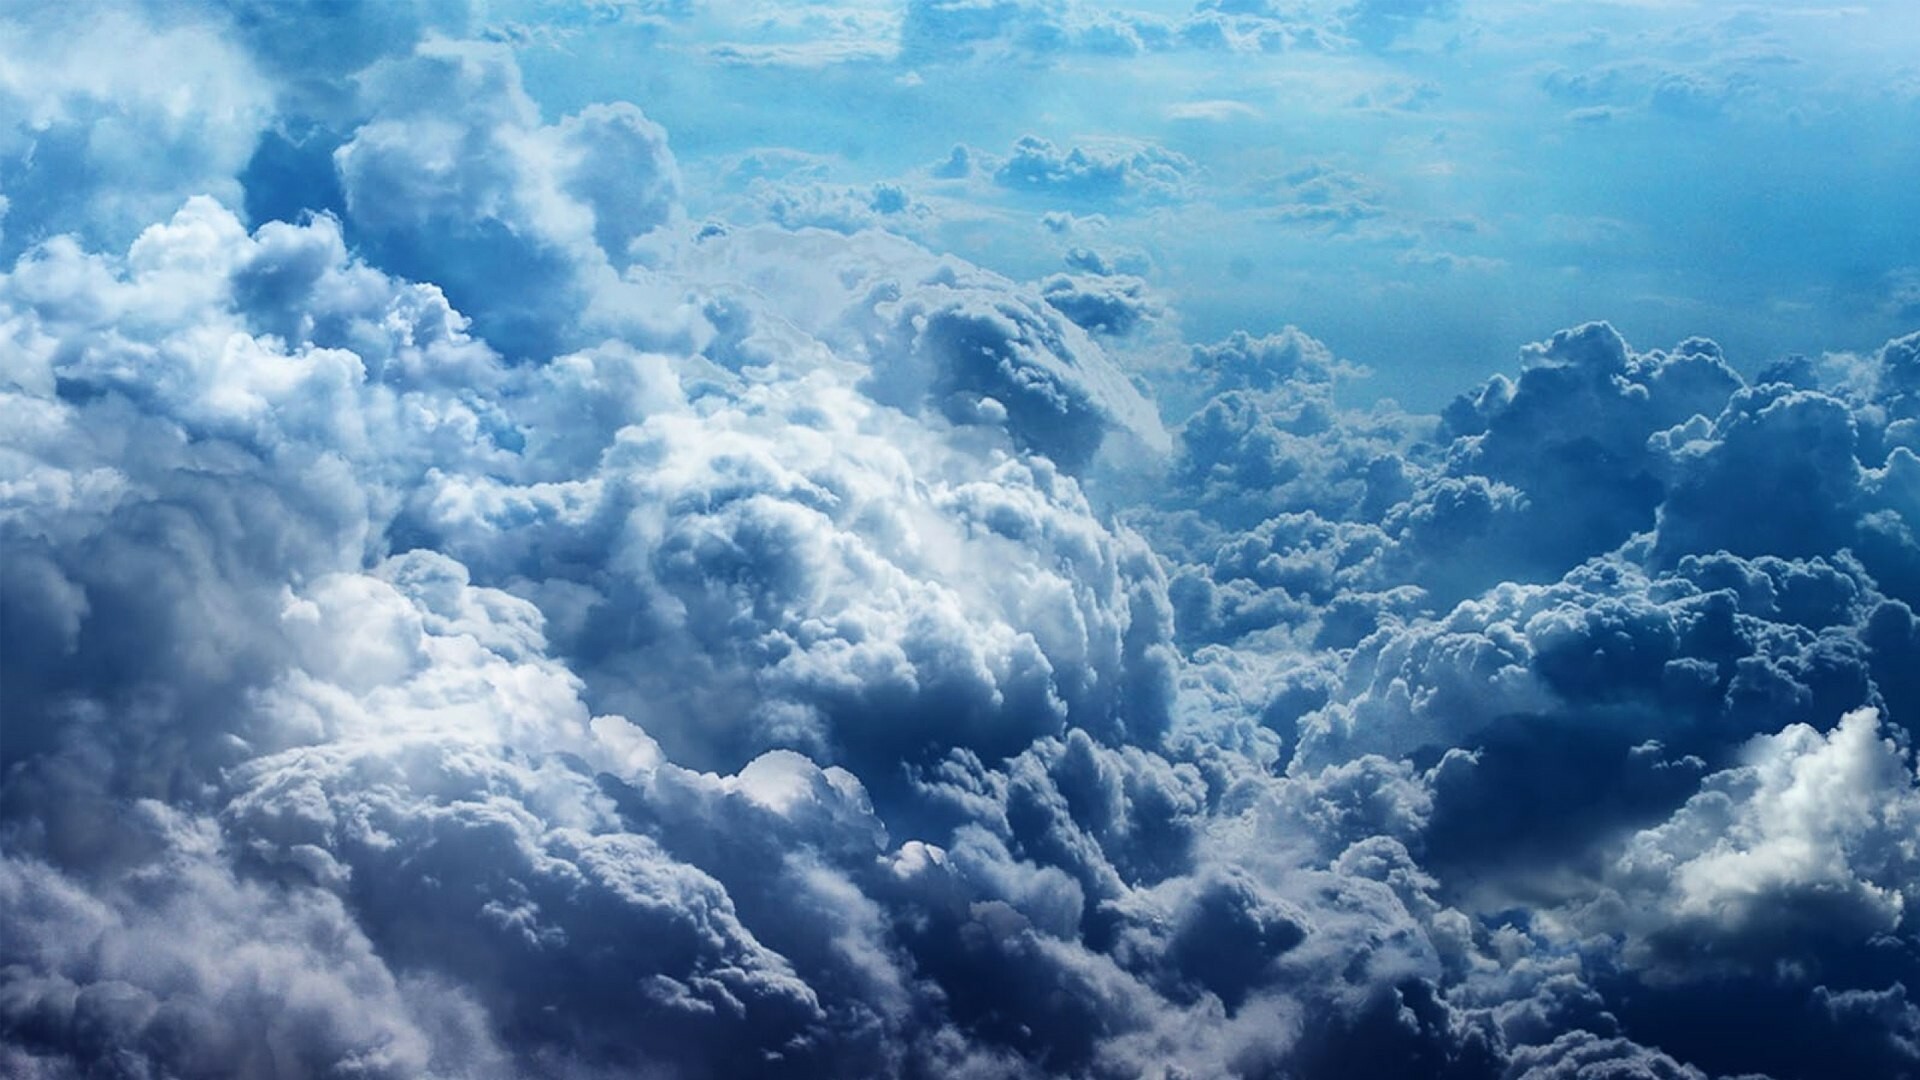 Clouds: Stratiformis species occur in extensive sheets where there is only minimal convective activity. 1920x1080 Full HD Wallpaper.